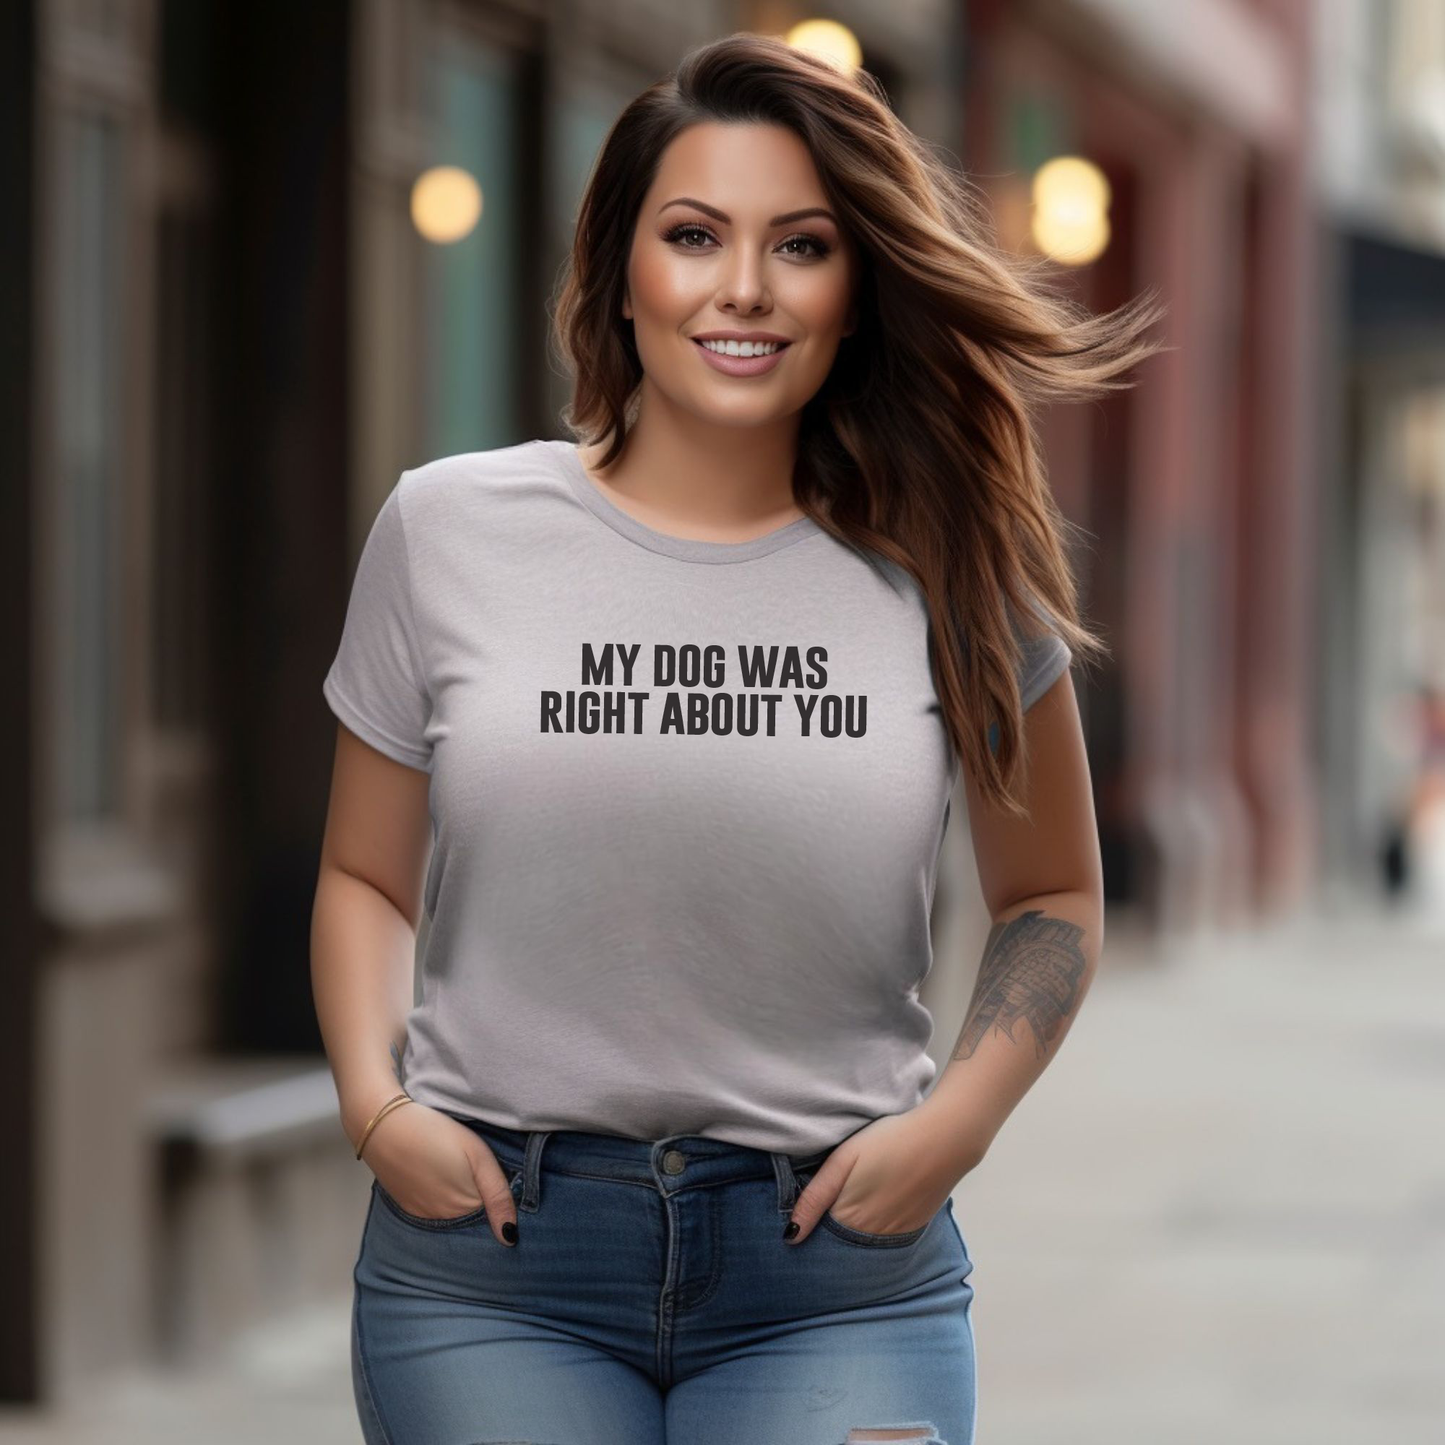 My Dog Was Right About You - Short Sleeve Tshirt